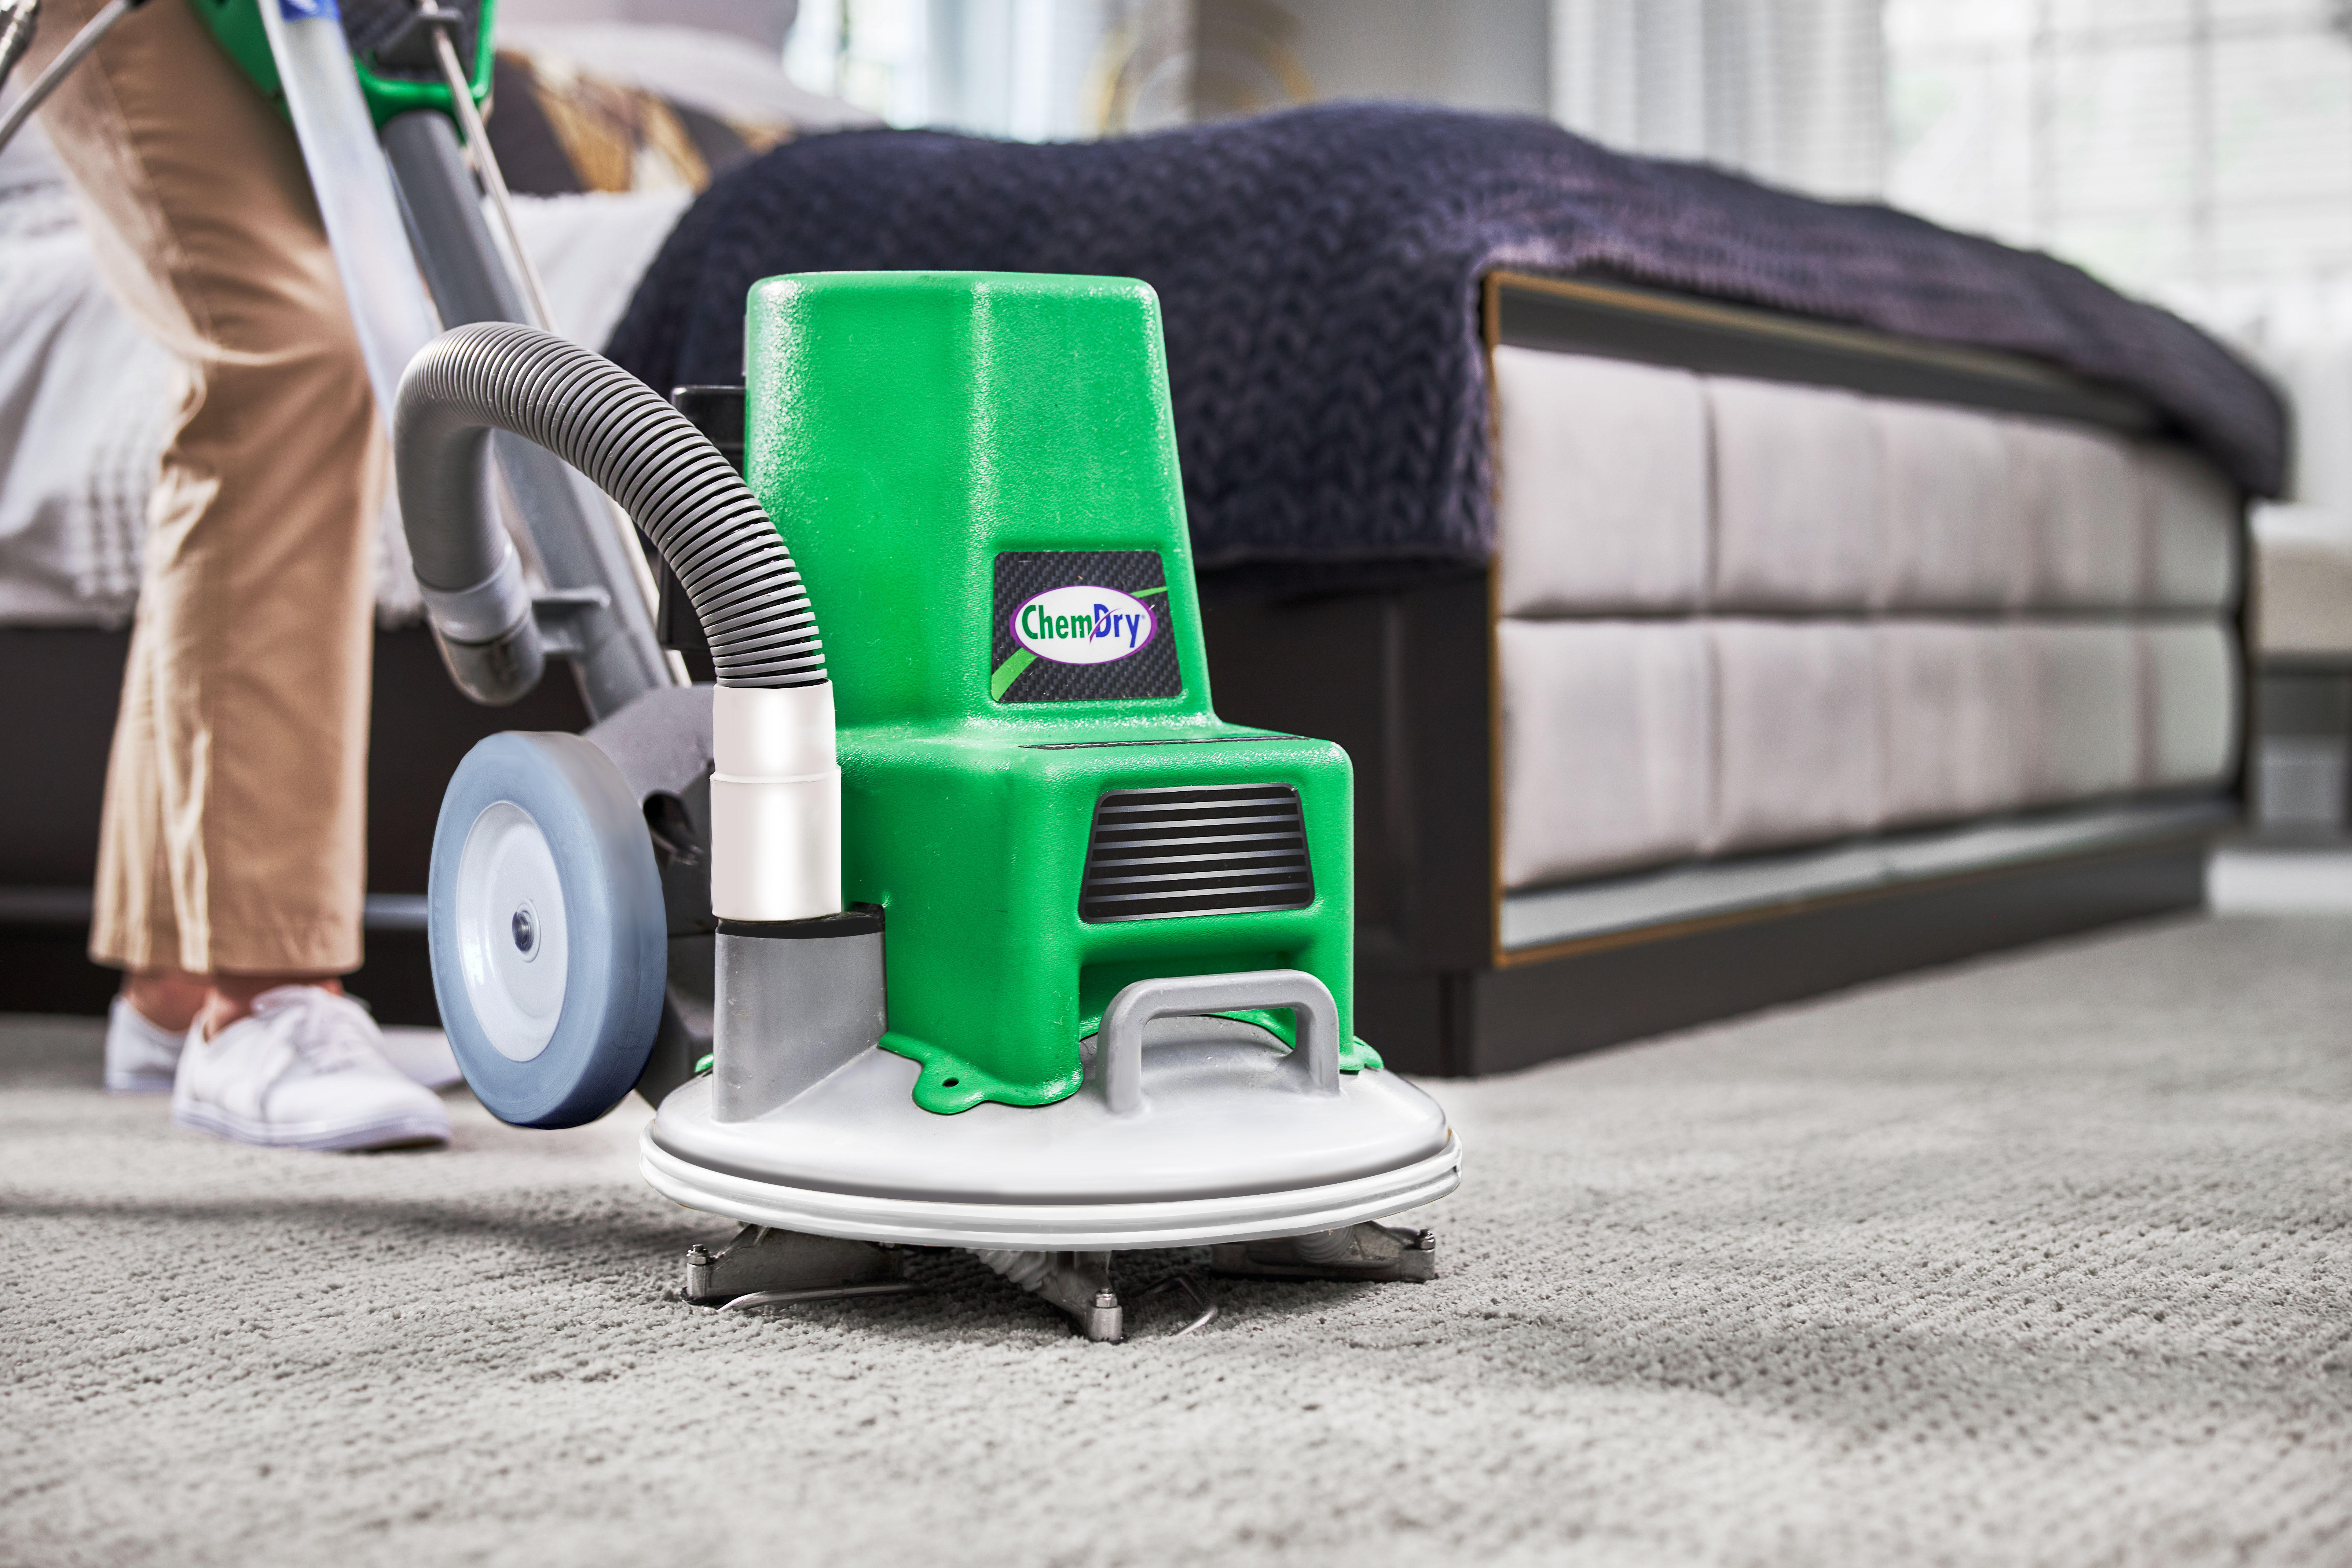 powerhead cleaner used by the technician to perform a carpet cleaning